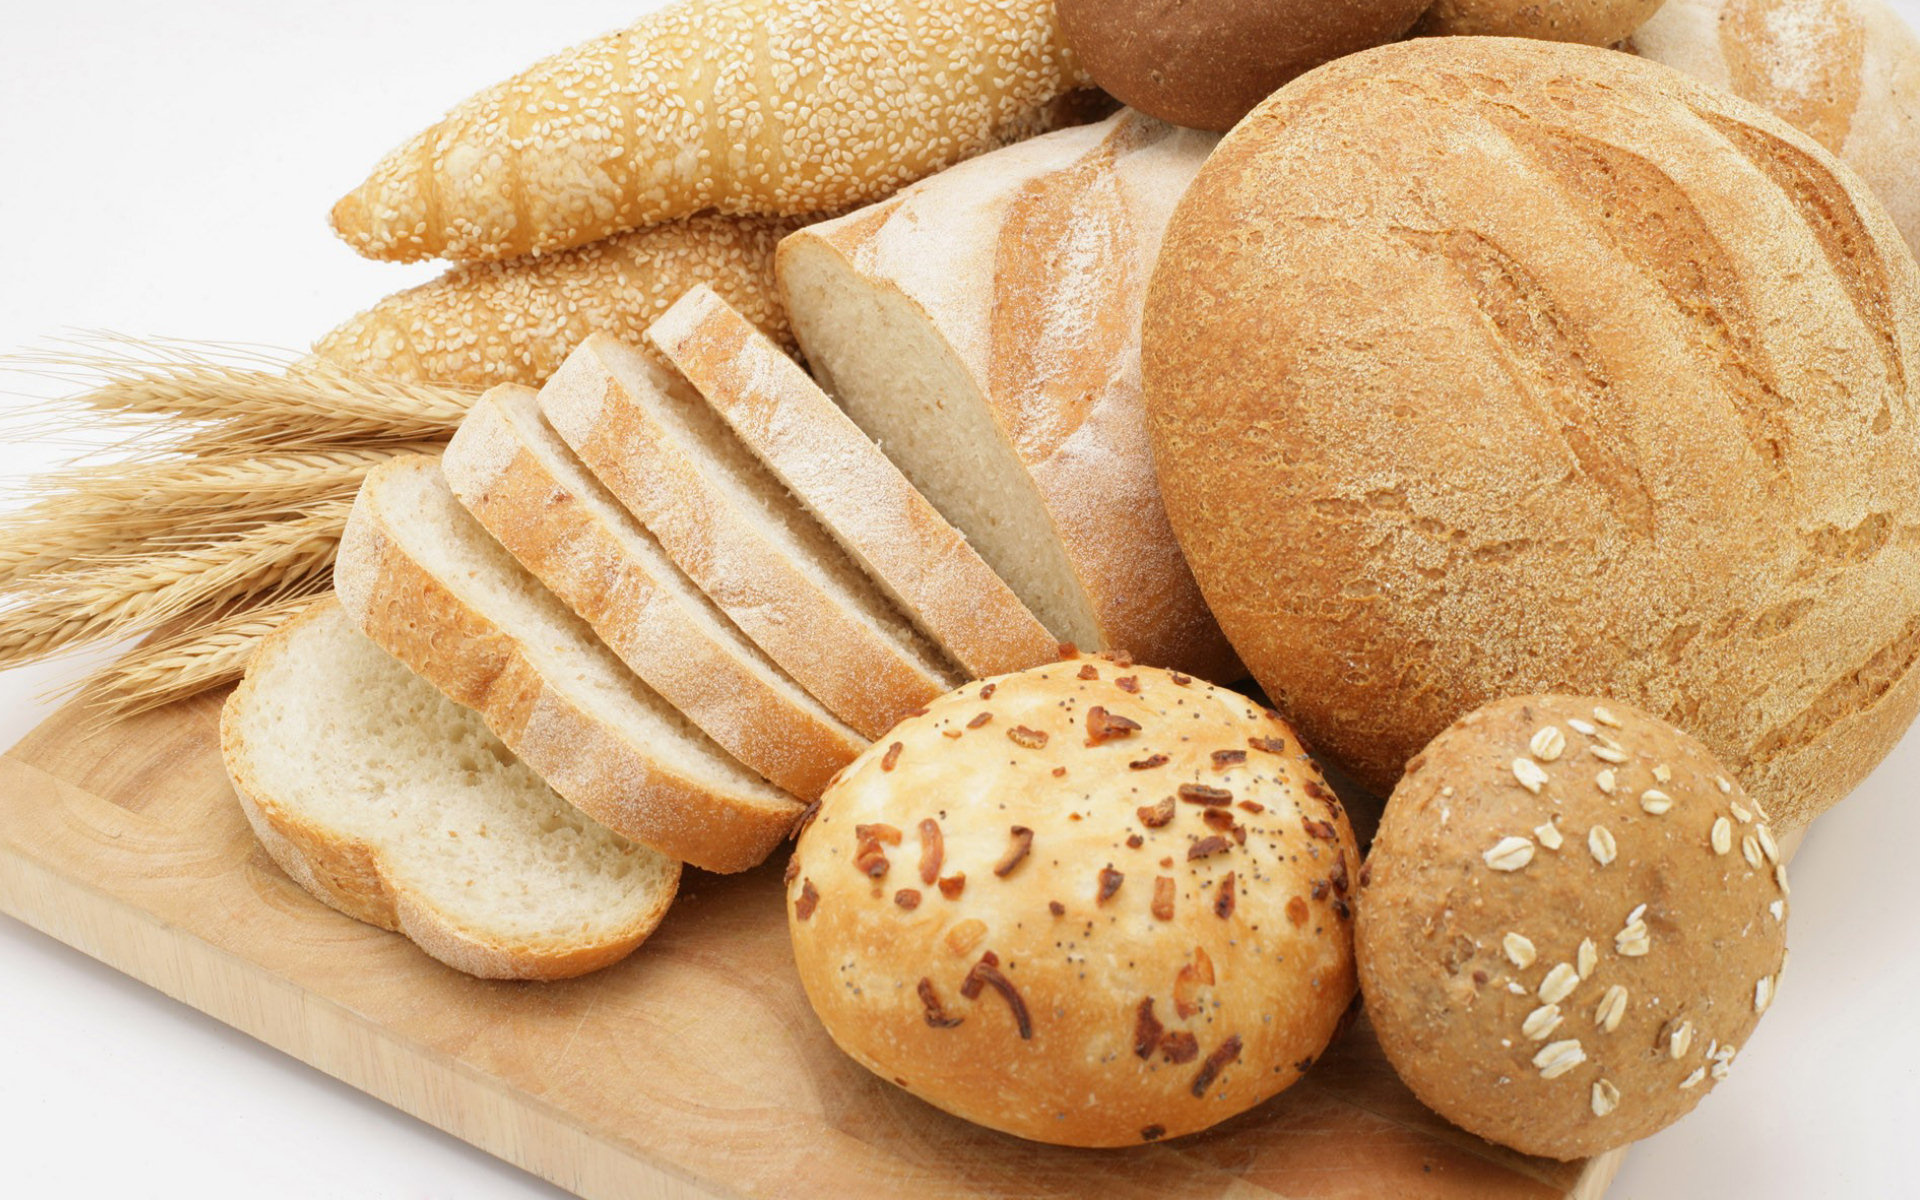 Artisanal bread, Rustic charm, Handcrafted masterpiece, Wholesome goodness, 1920x1200 HD Desktop